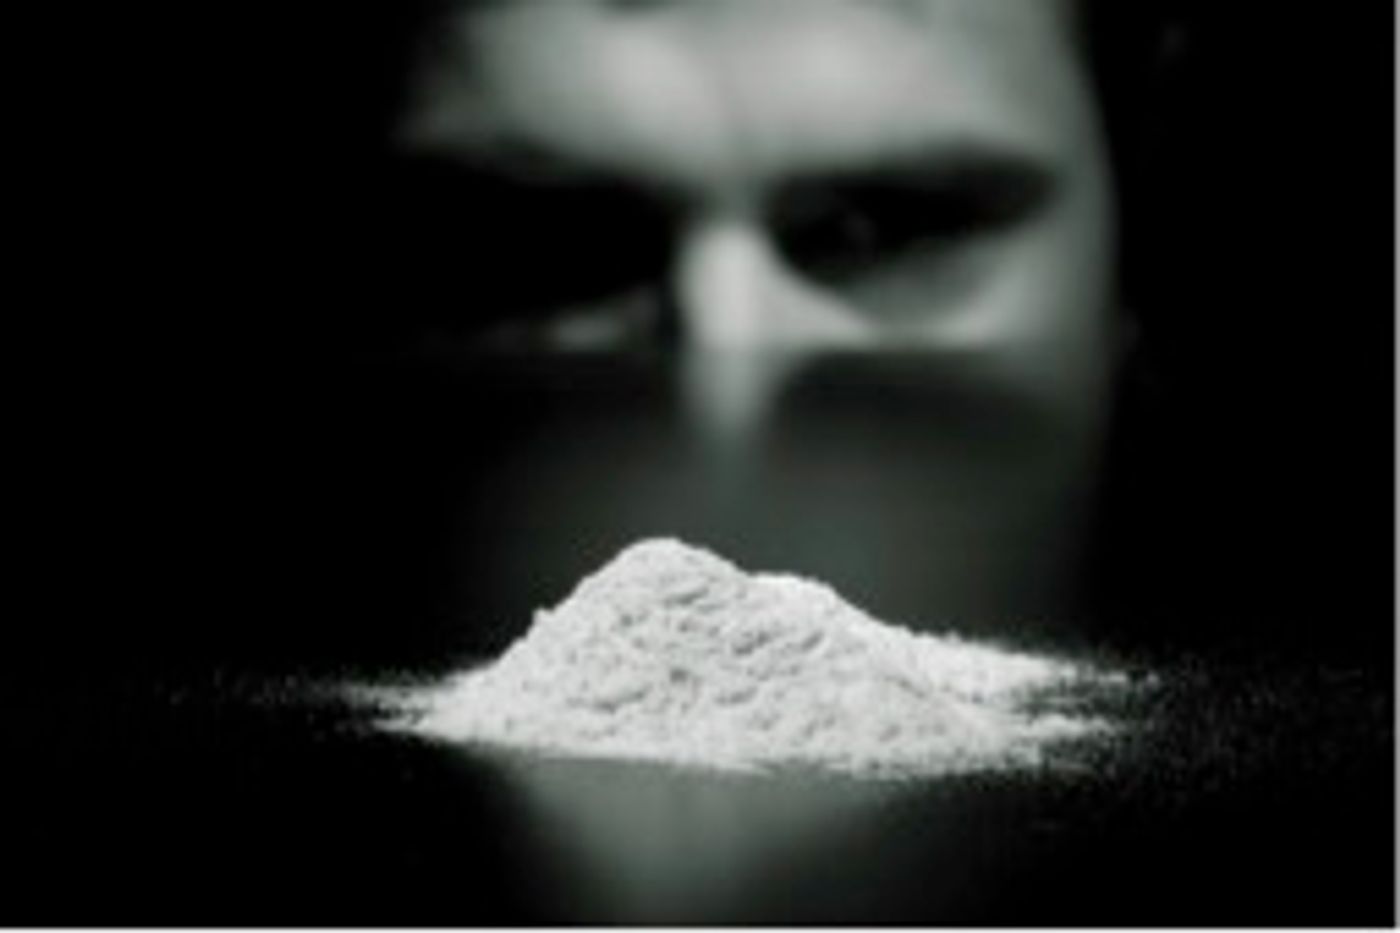 Magnetic Stimulation for Cocaine Addition Shown Effective